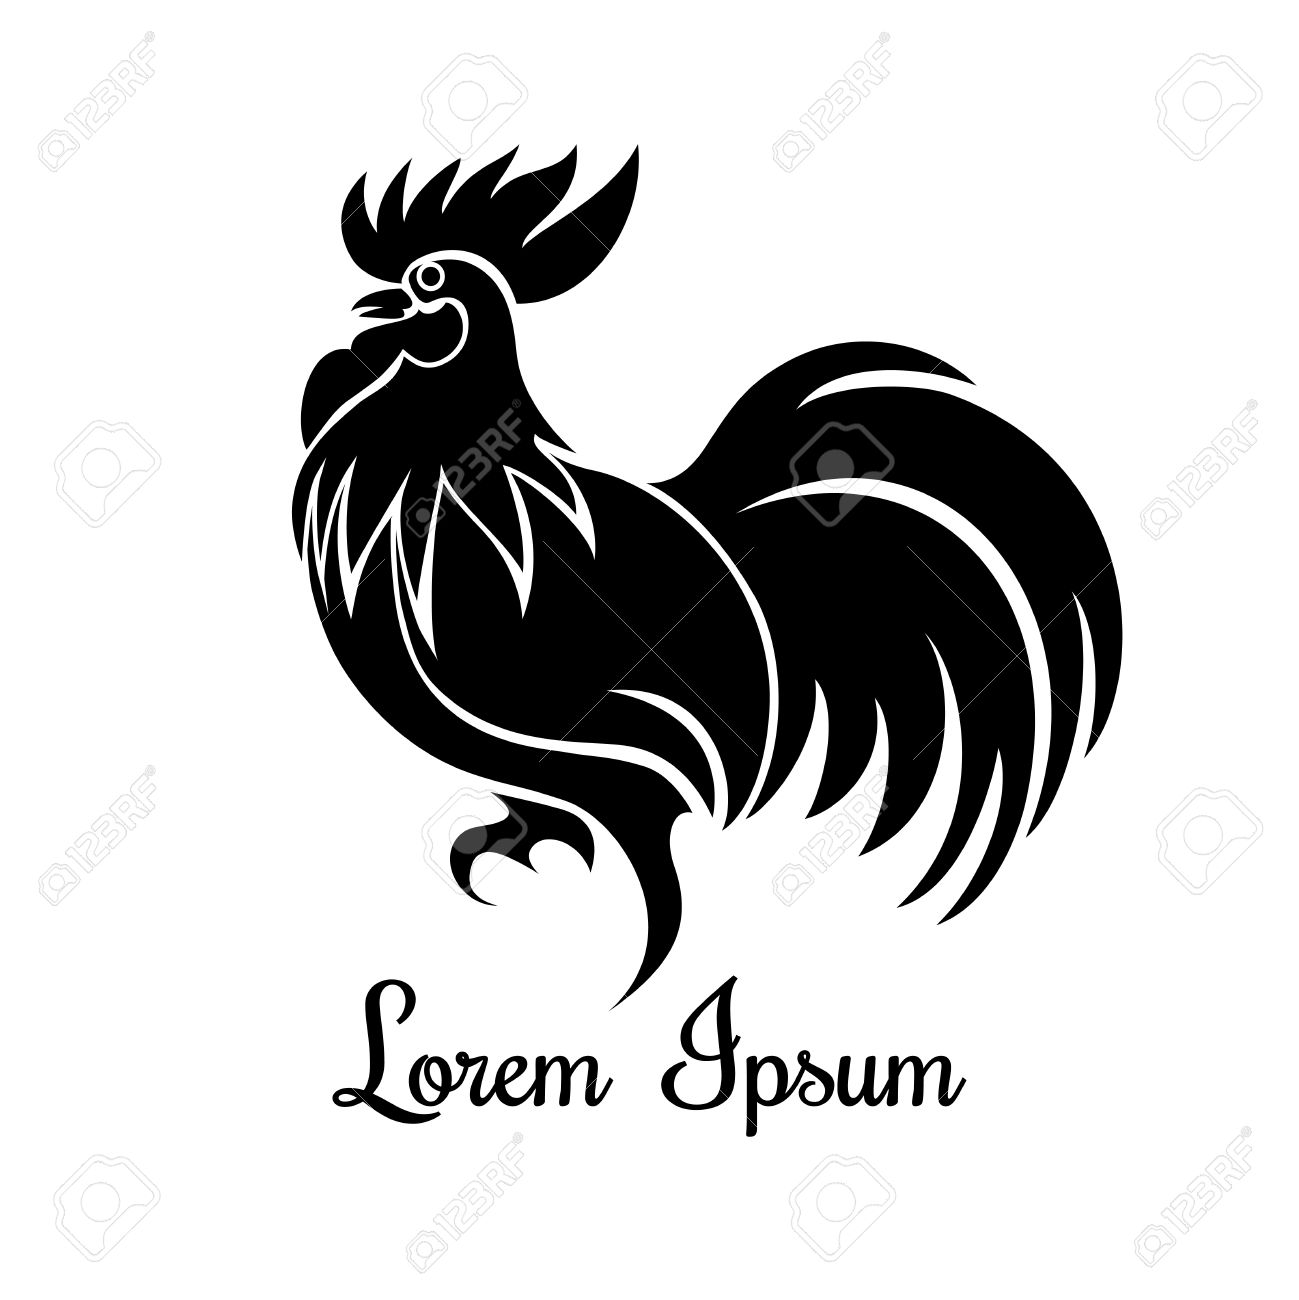 Rooster icon Royalty Free Vector Image - VectorStock